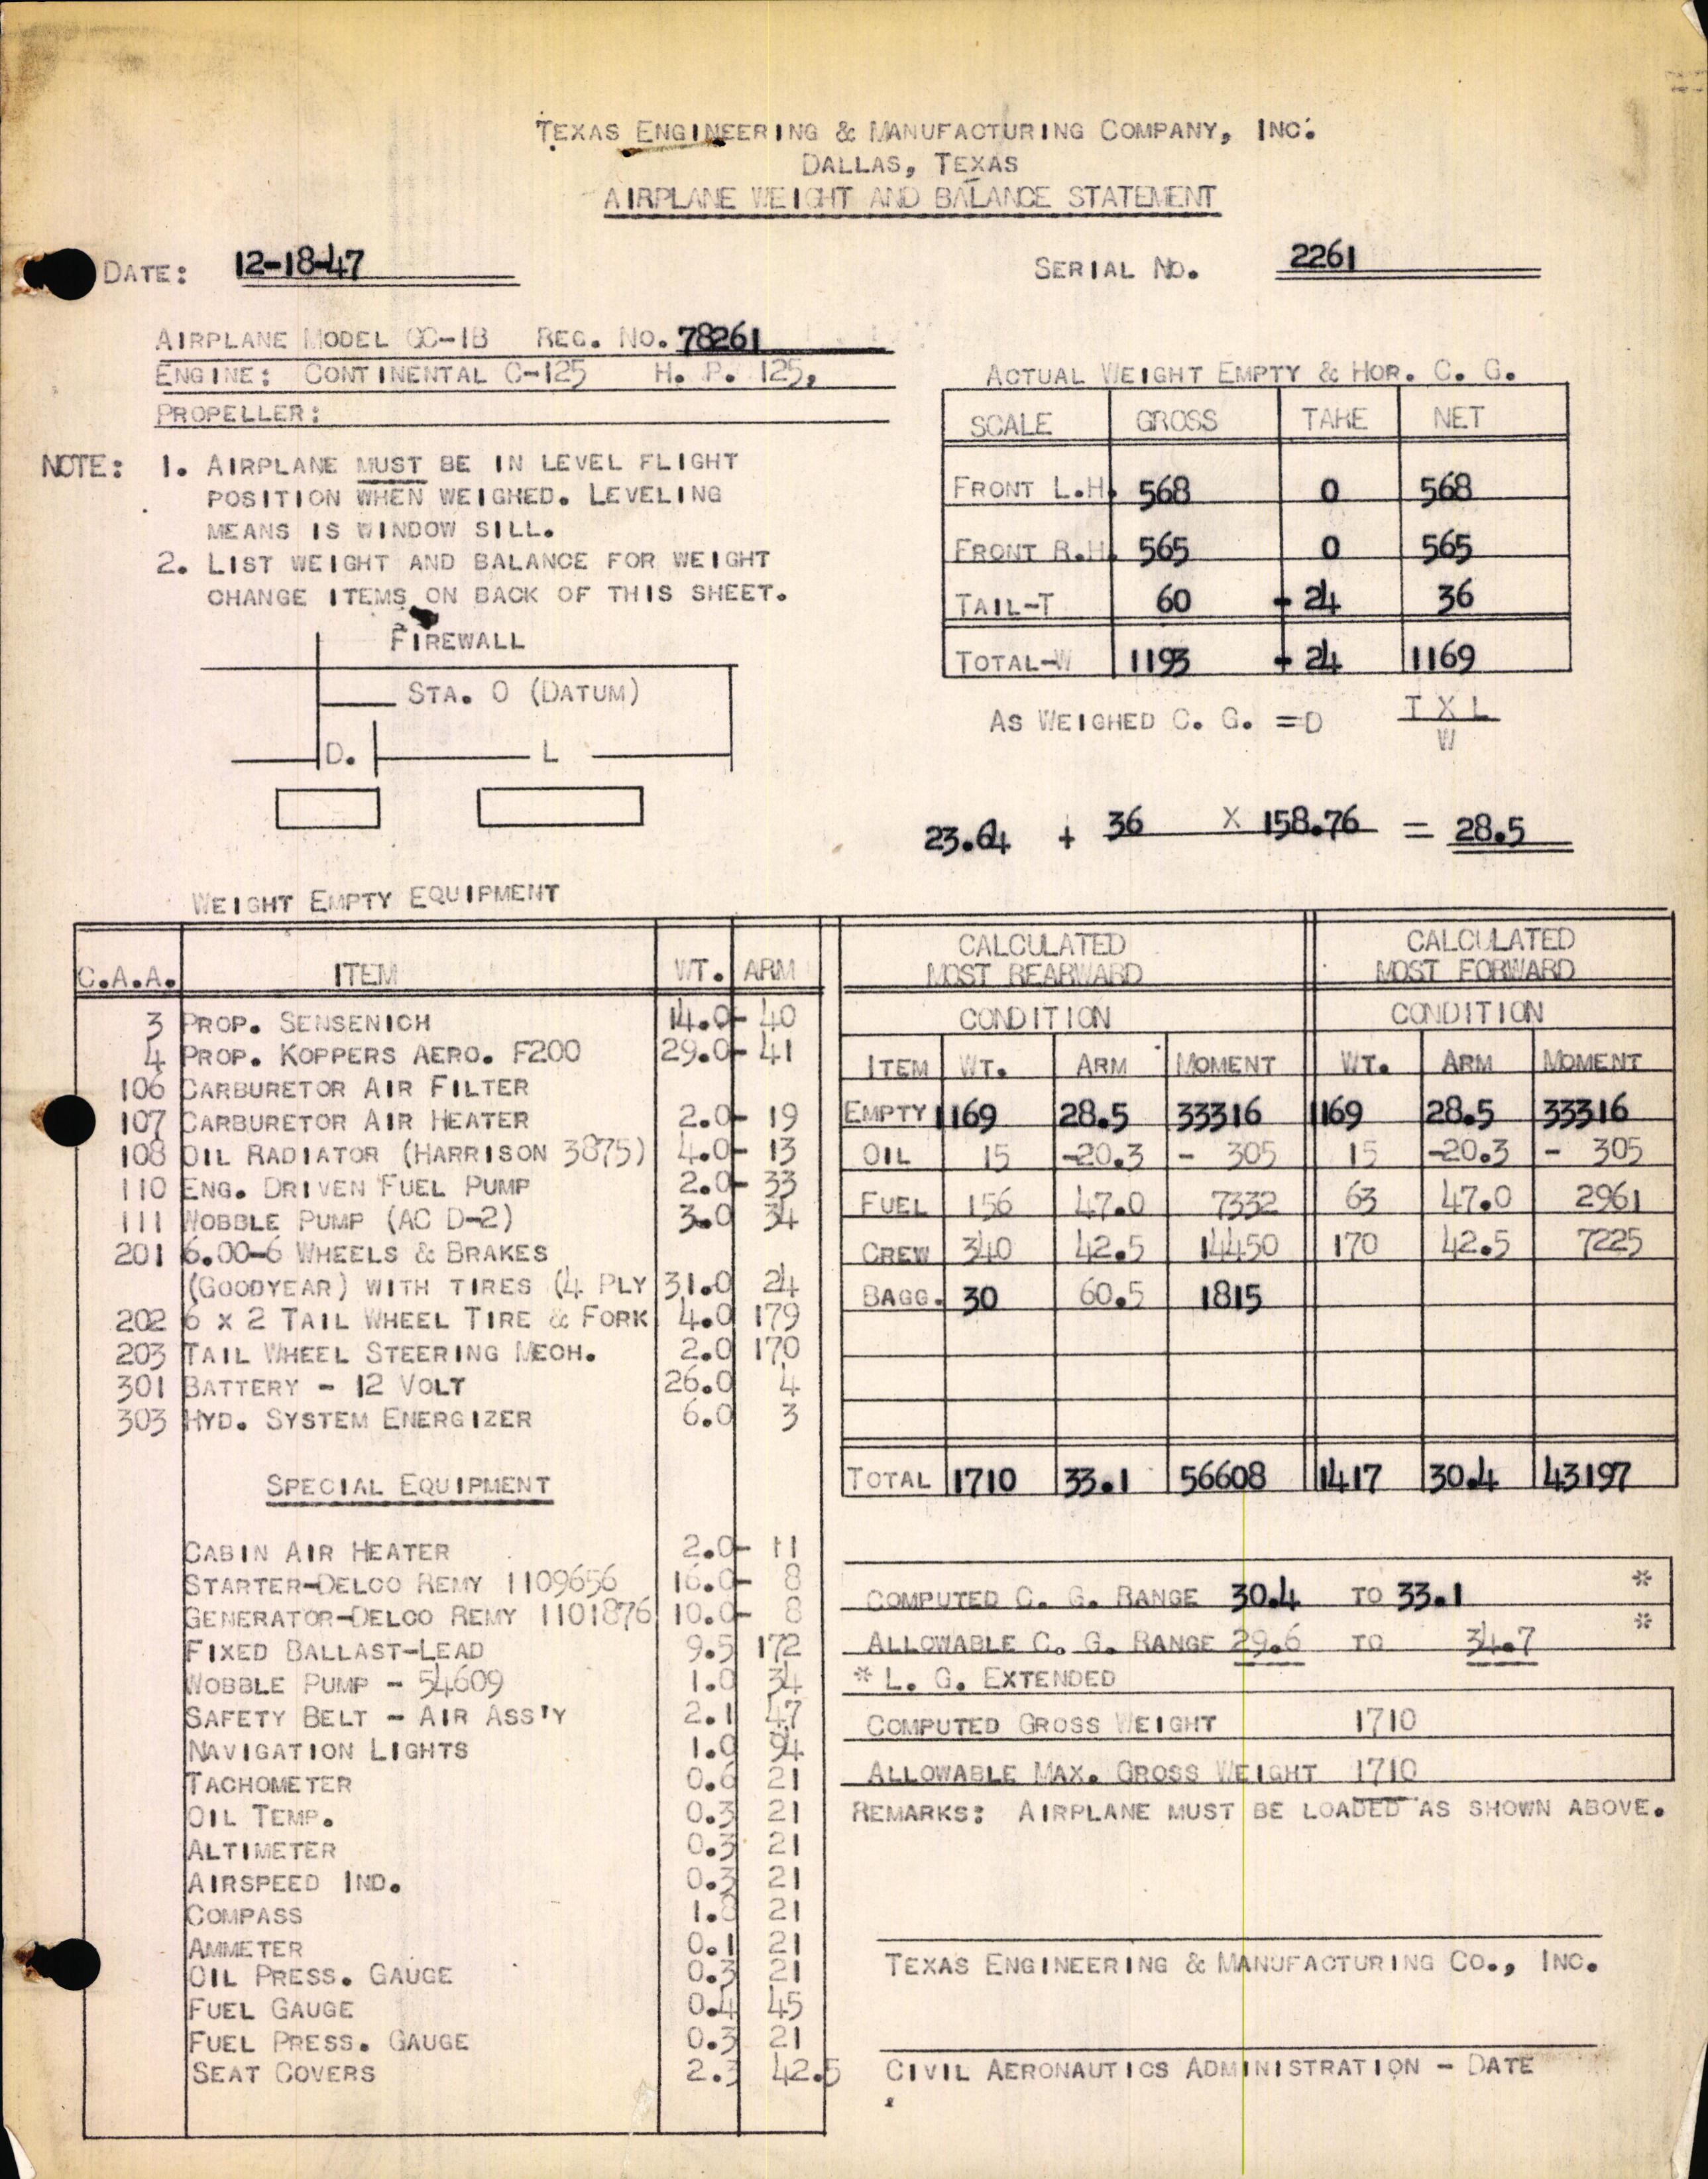 Sample page 1 from AirCorps Library document: Technical Information for Serial Number 2261